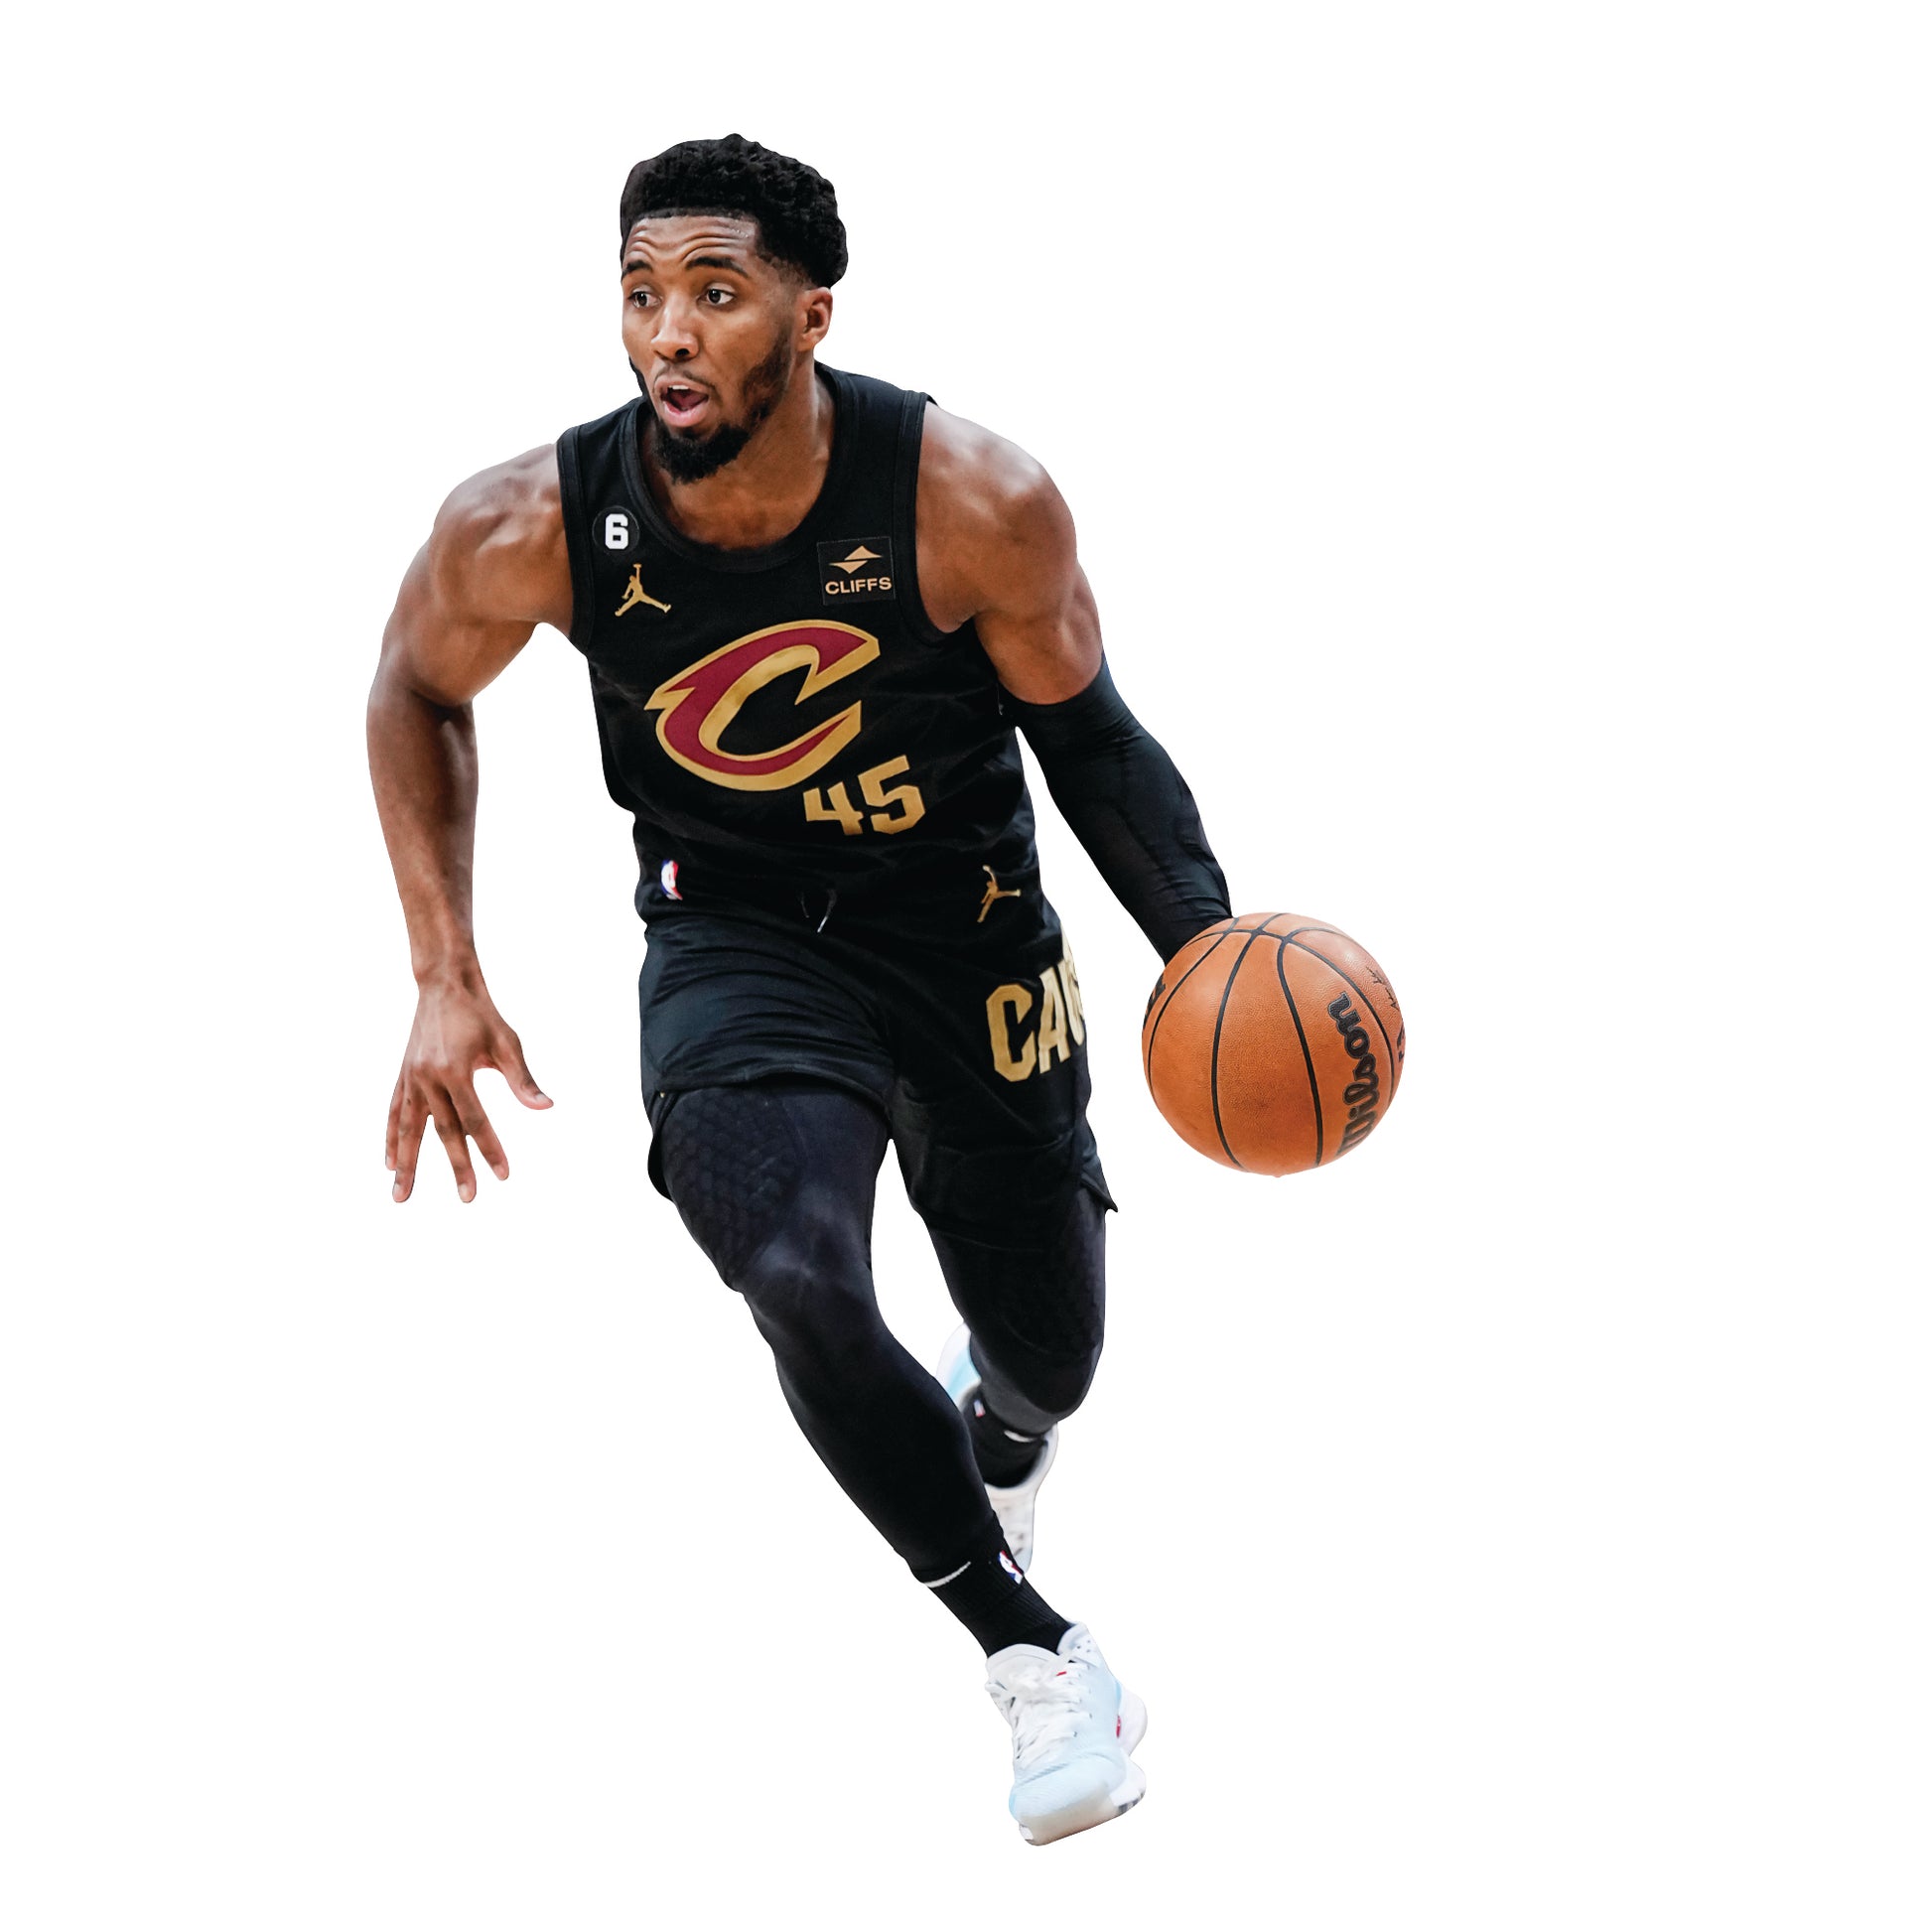 Cleveland Cavaliers: Donovan Mitchell 2022 Statement Jersey - Official –  Fathead